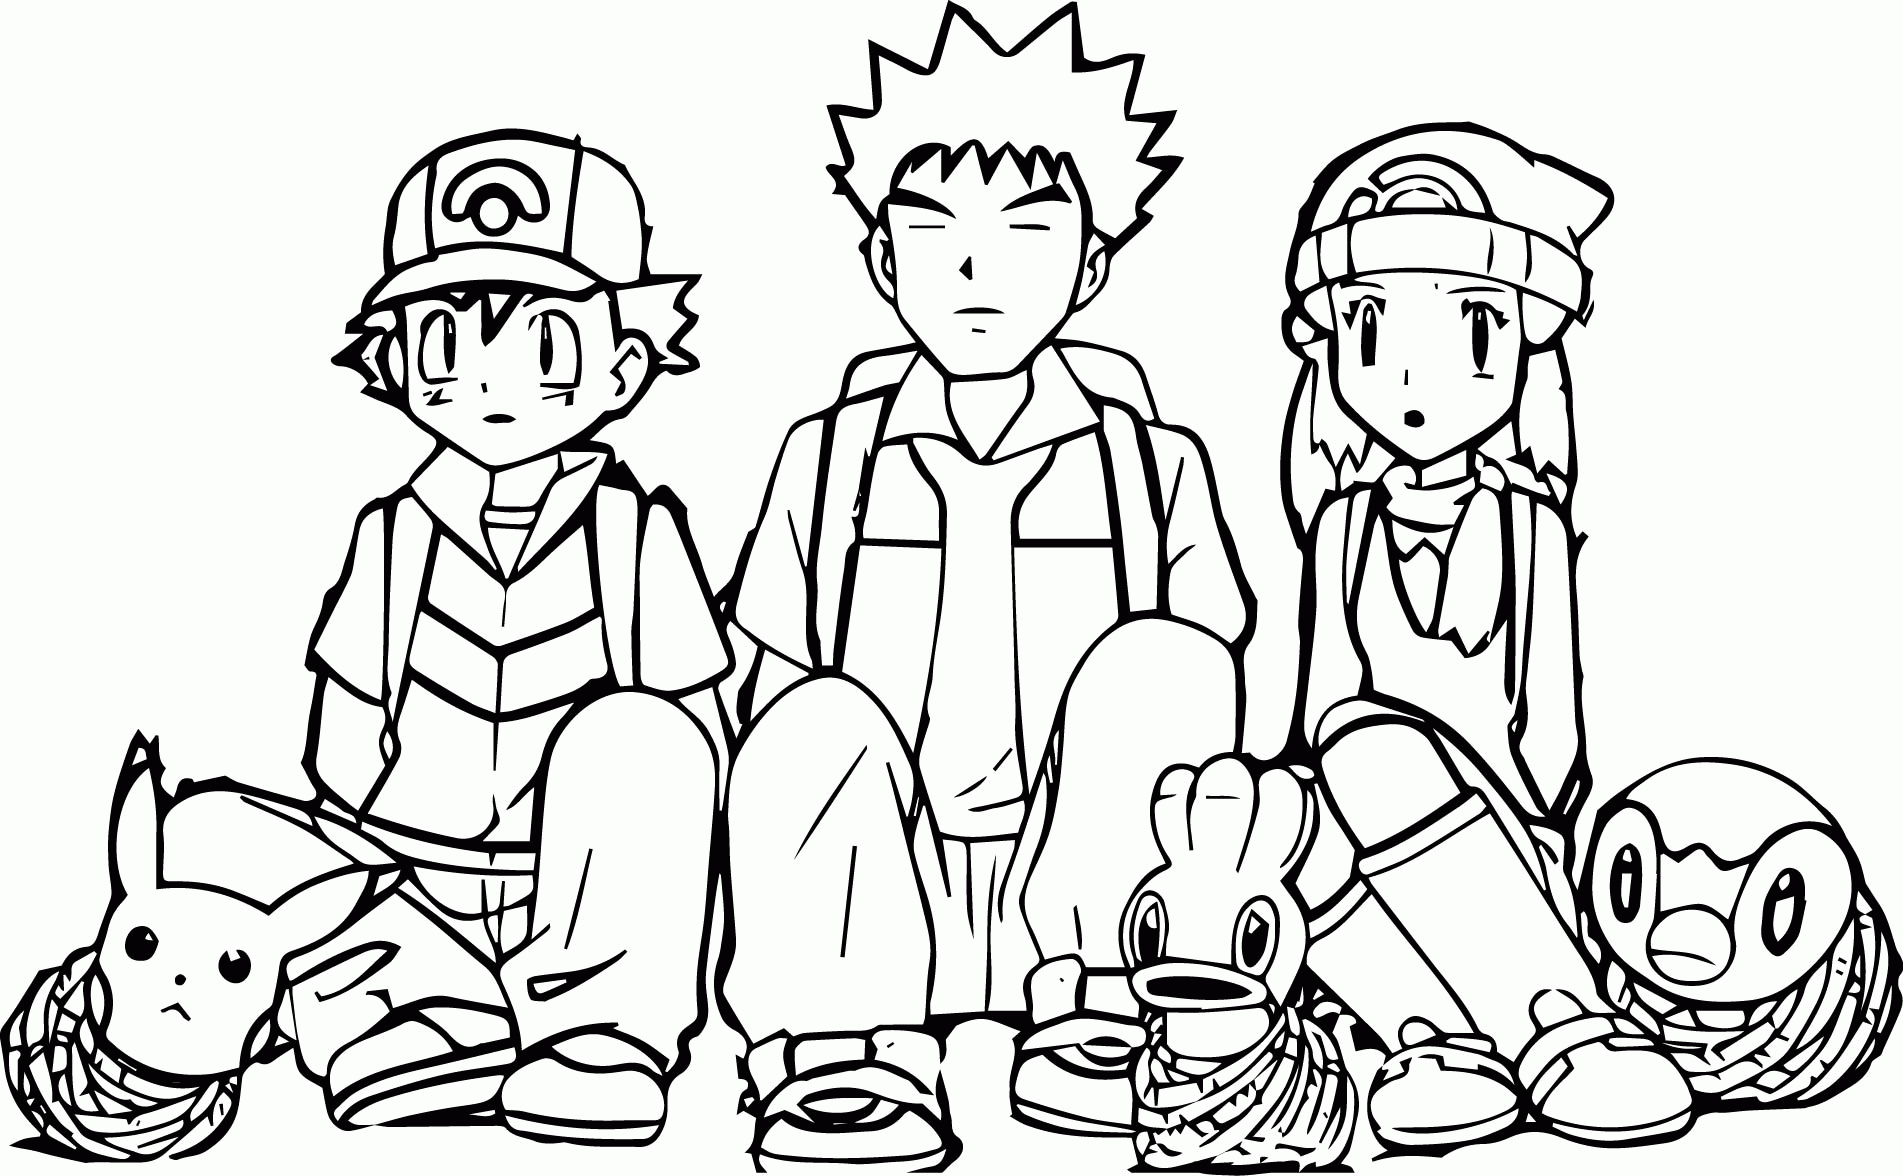 Ash Pokemon Xy Coloring Page Page For All Ages Coloring Home